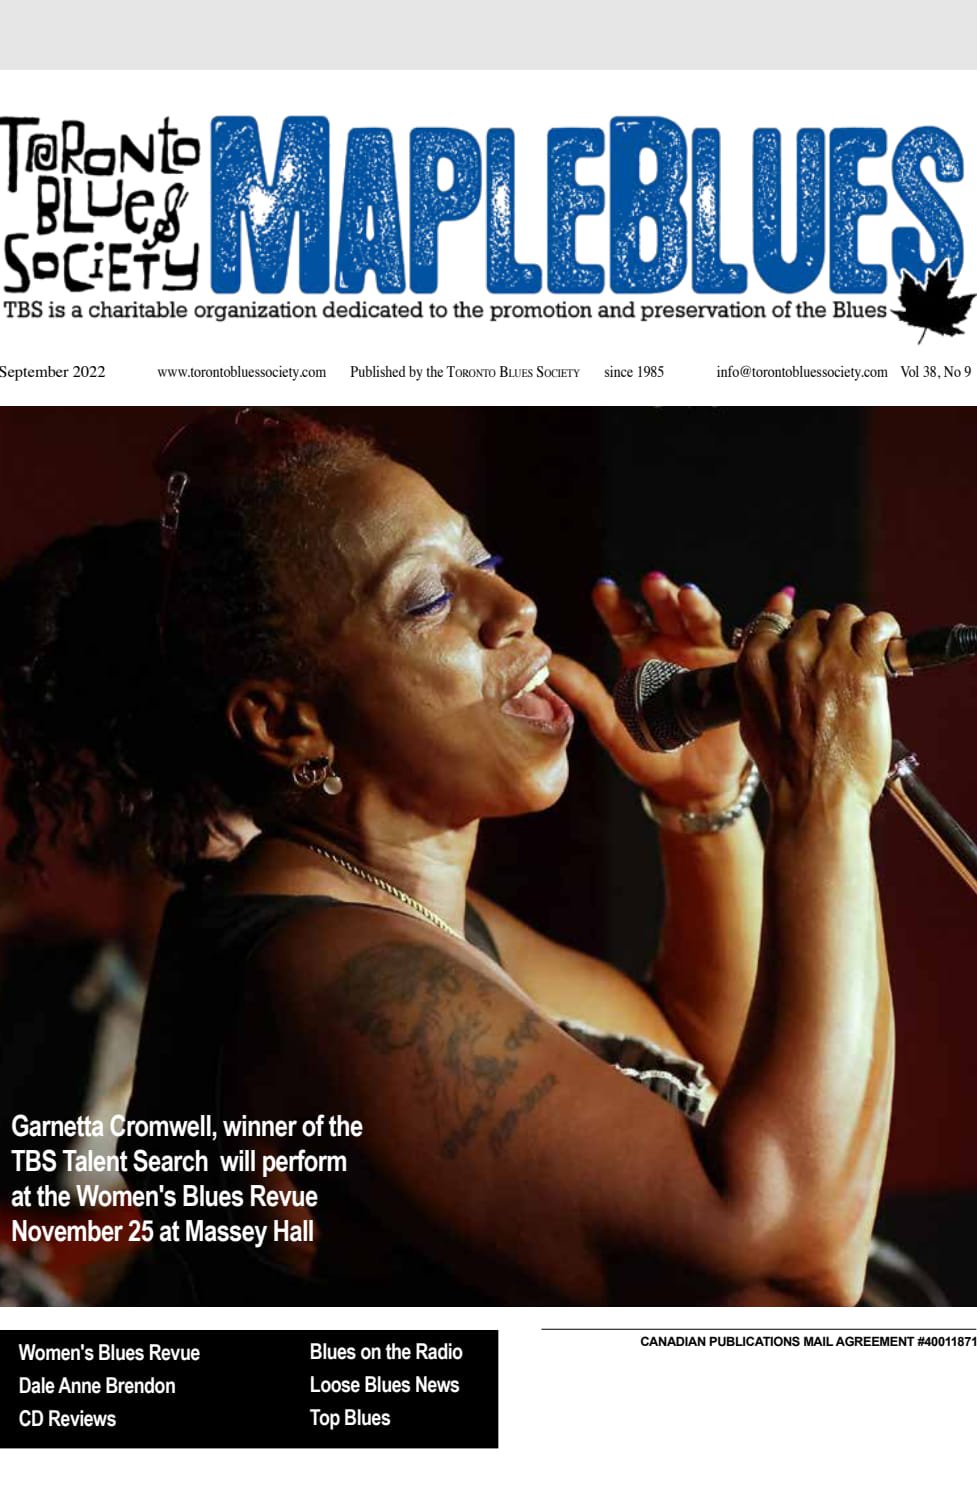 Featured Cover photo of the Maple Blues Newsletter August 2022 edition